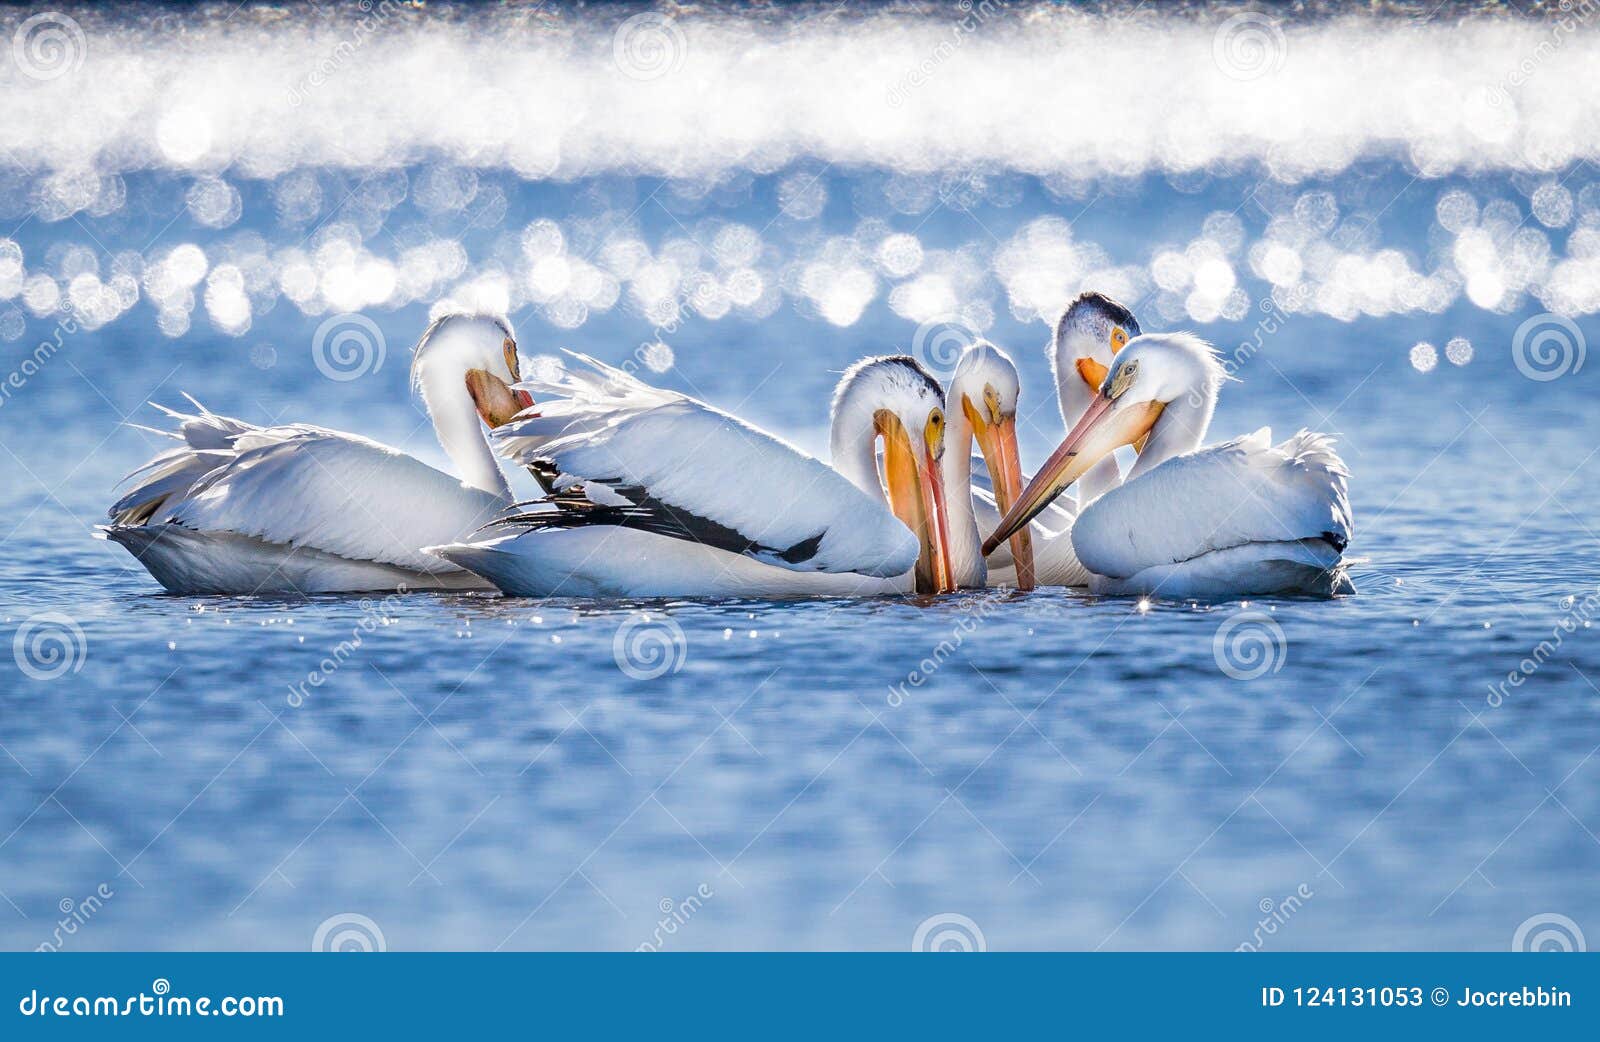 large white pelicans gather together for fishing